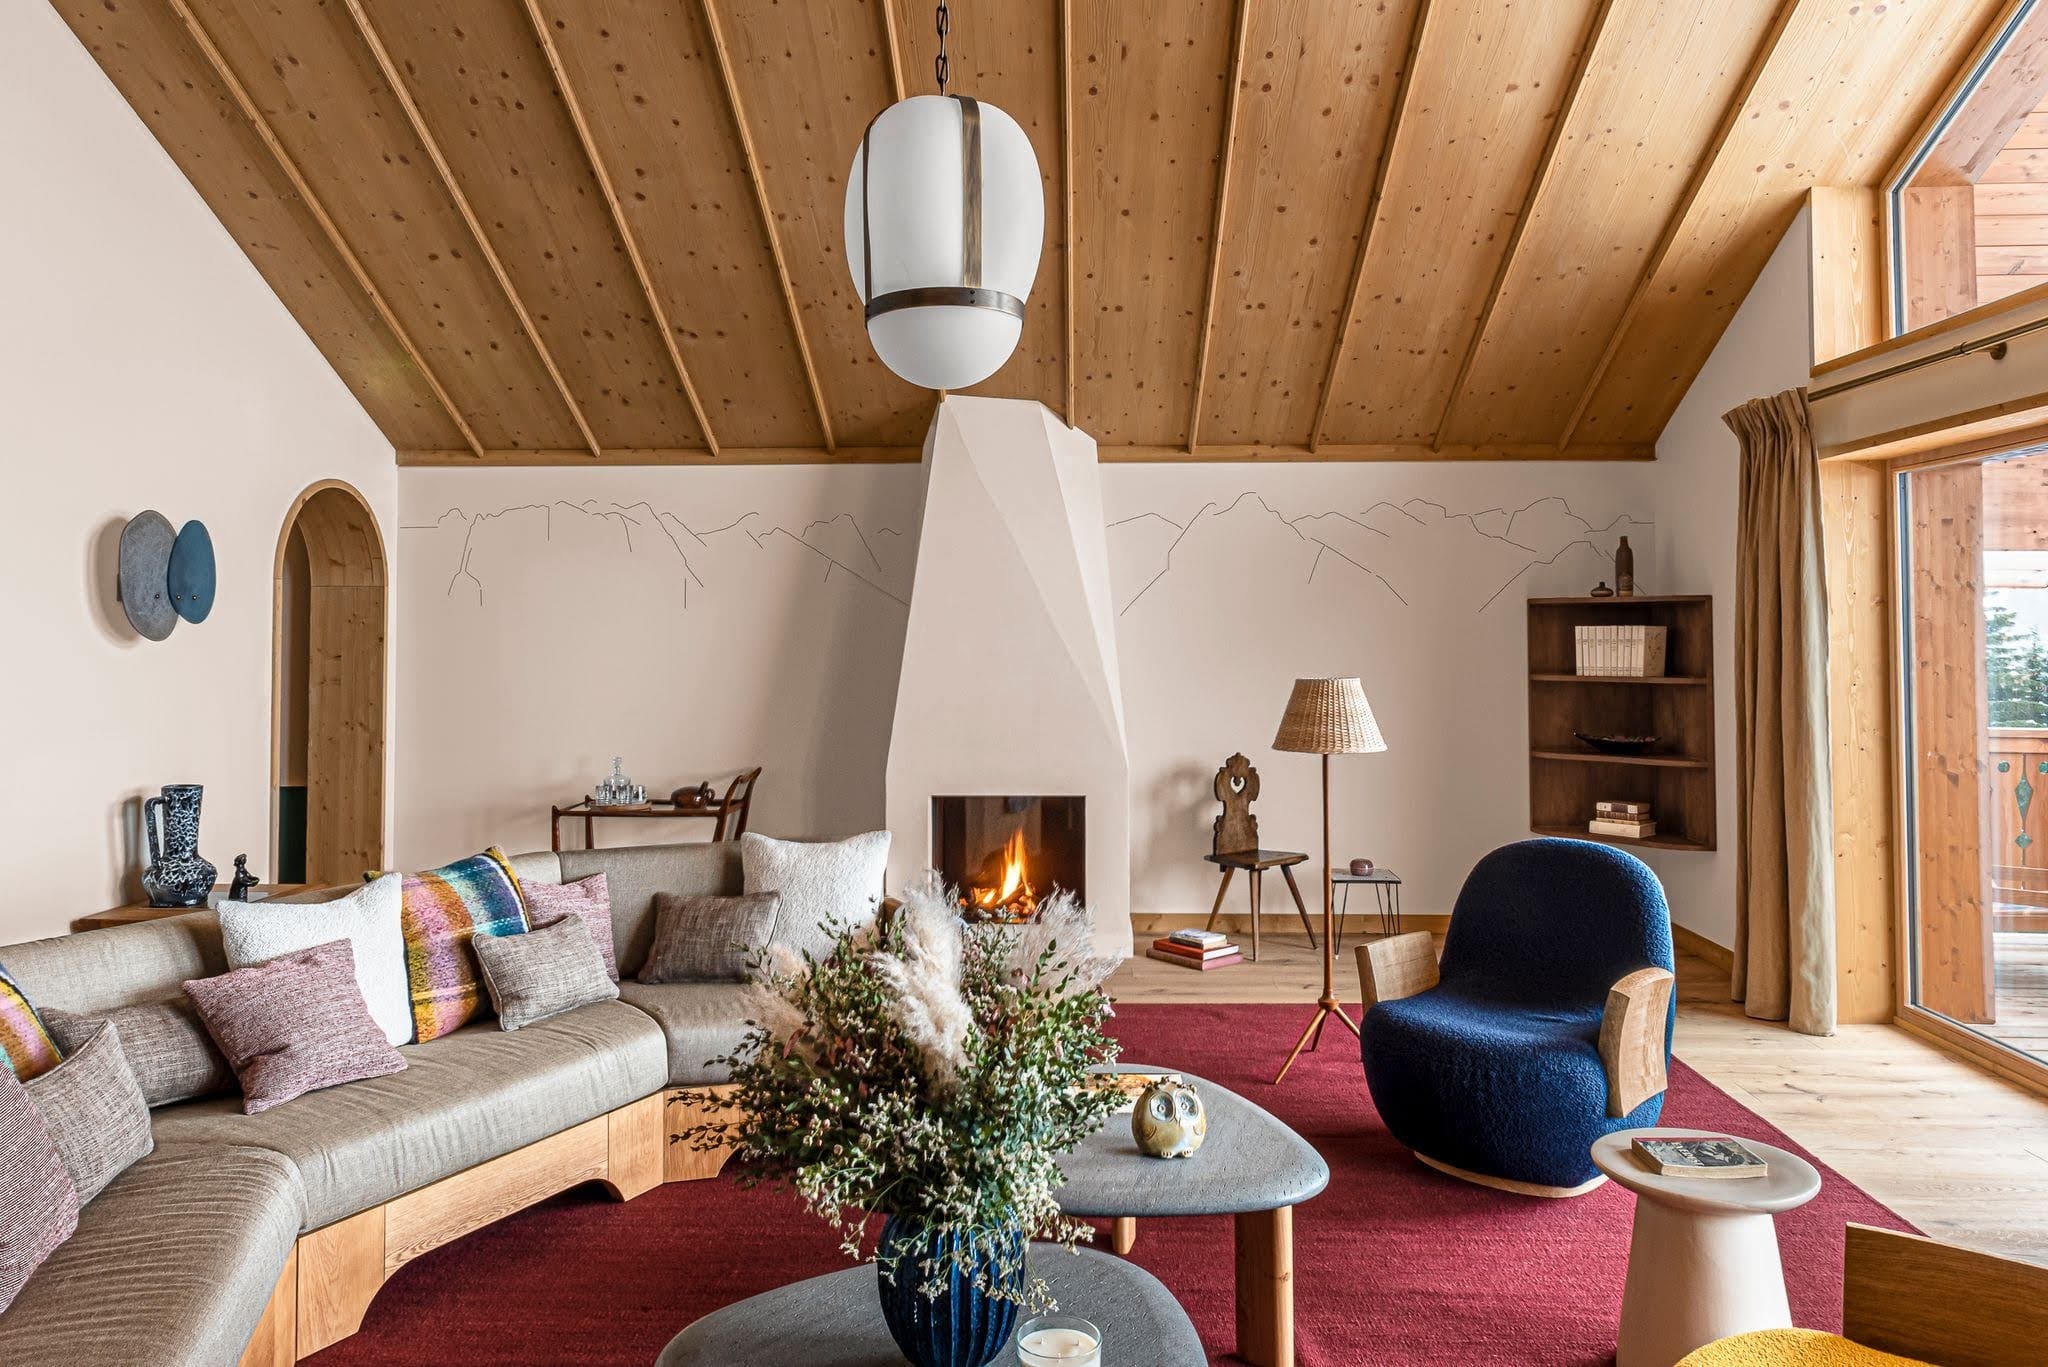 The Pierre Yovanovitch-designed salon in one of the two private chalets adjoined to Le Coucou in Meribel